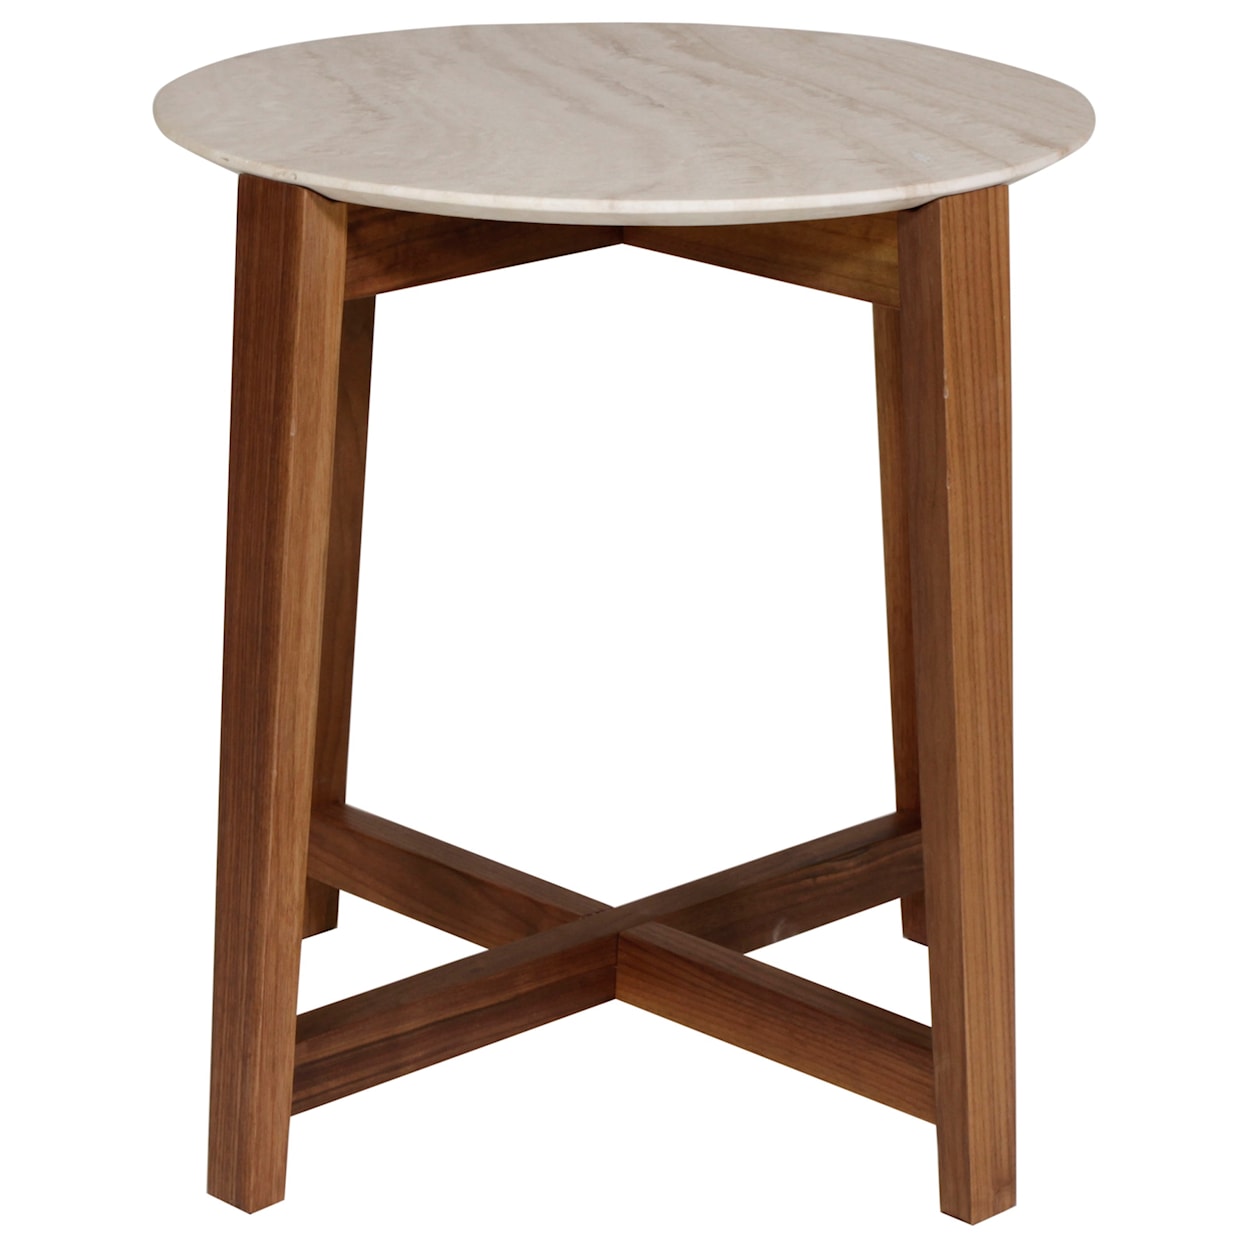 Natuzzi Editions Sole End Table